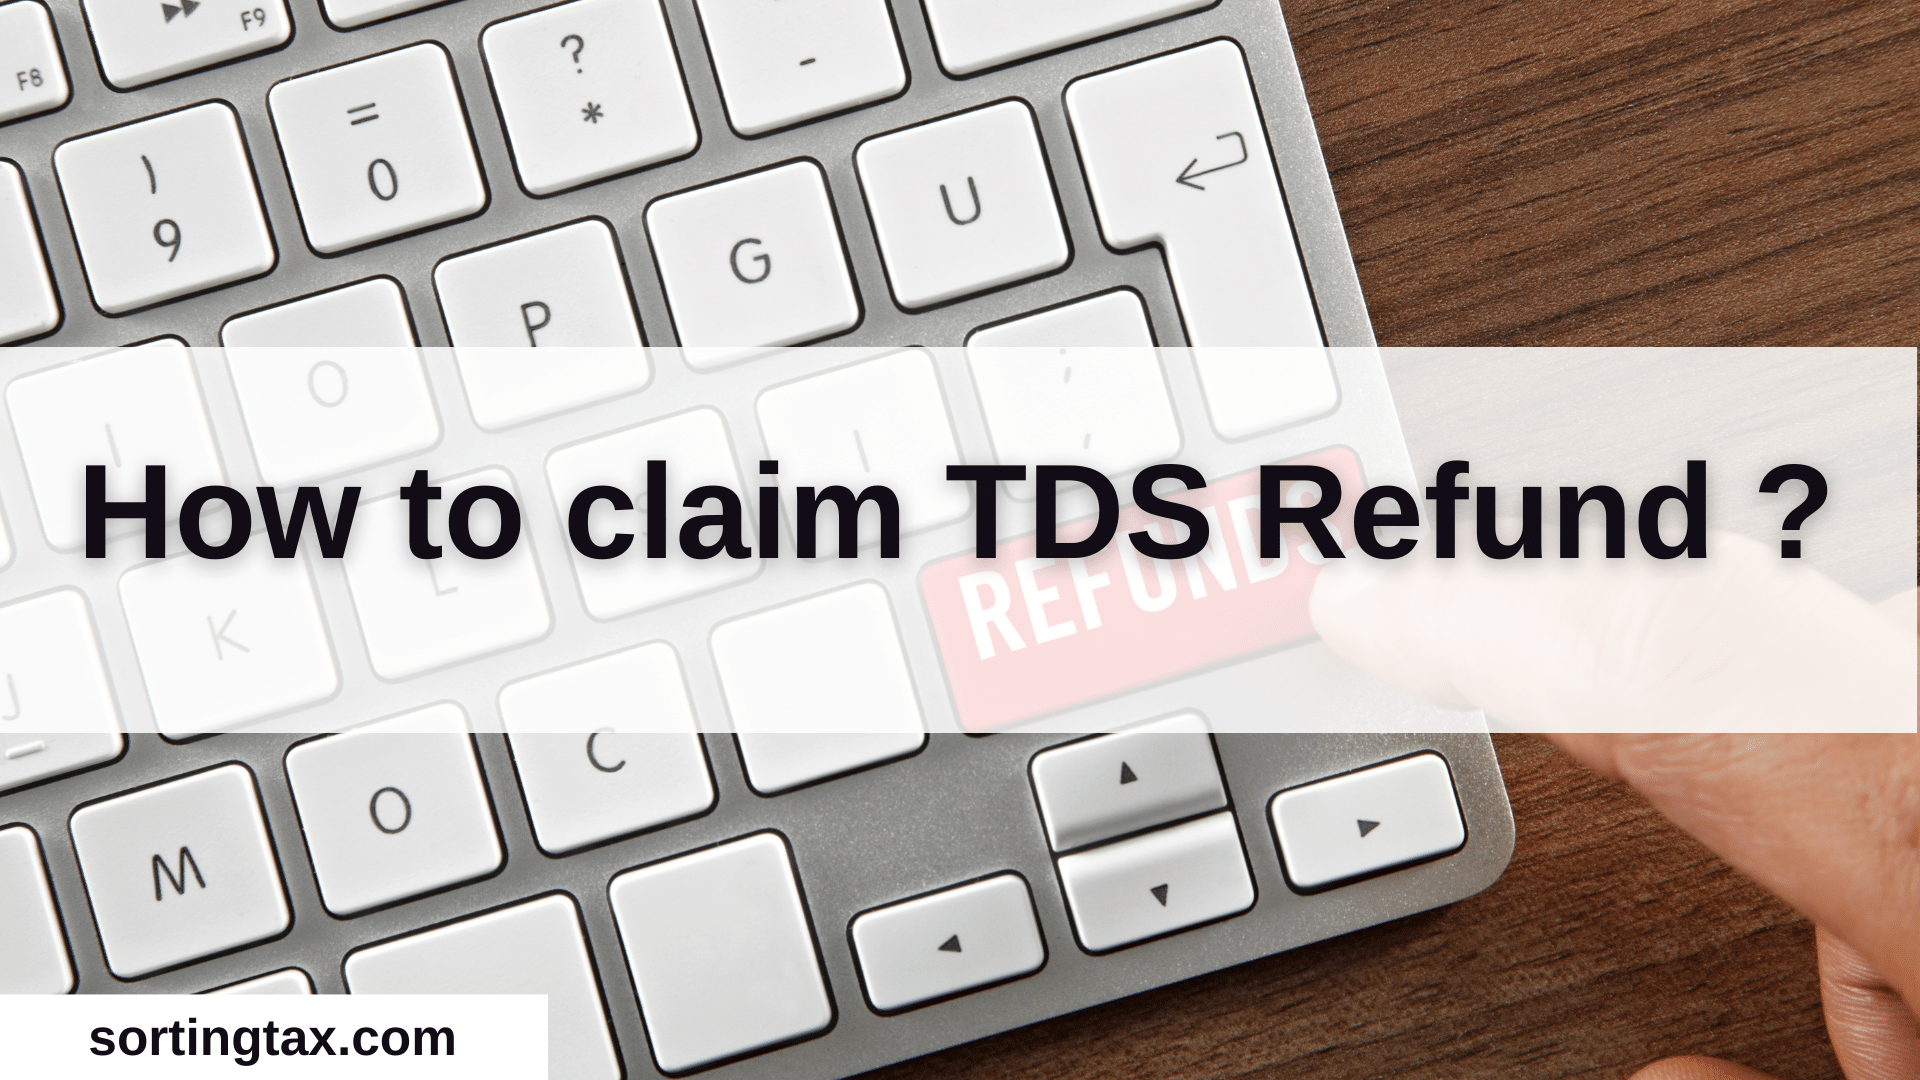 how-to-claim-tds-refund-sorting-tax